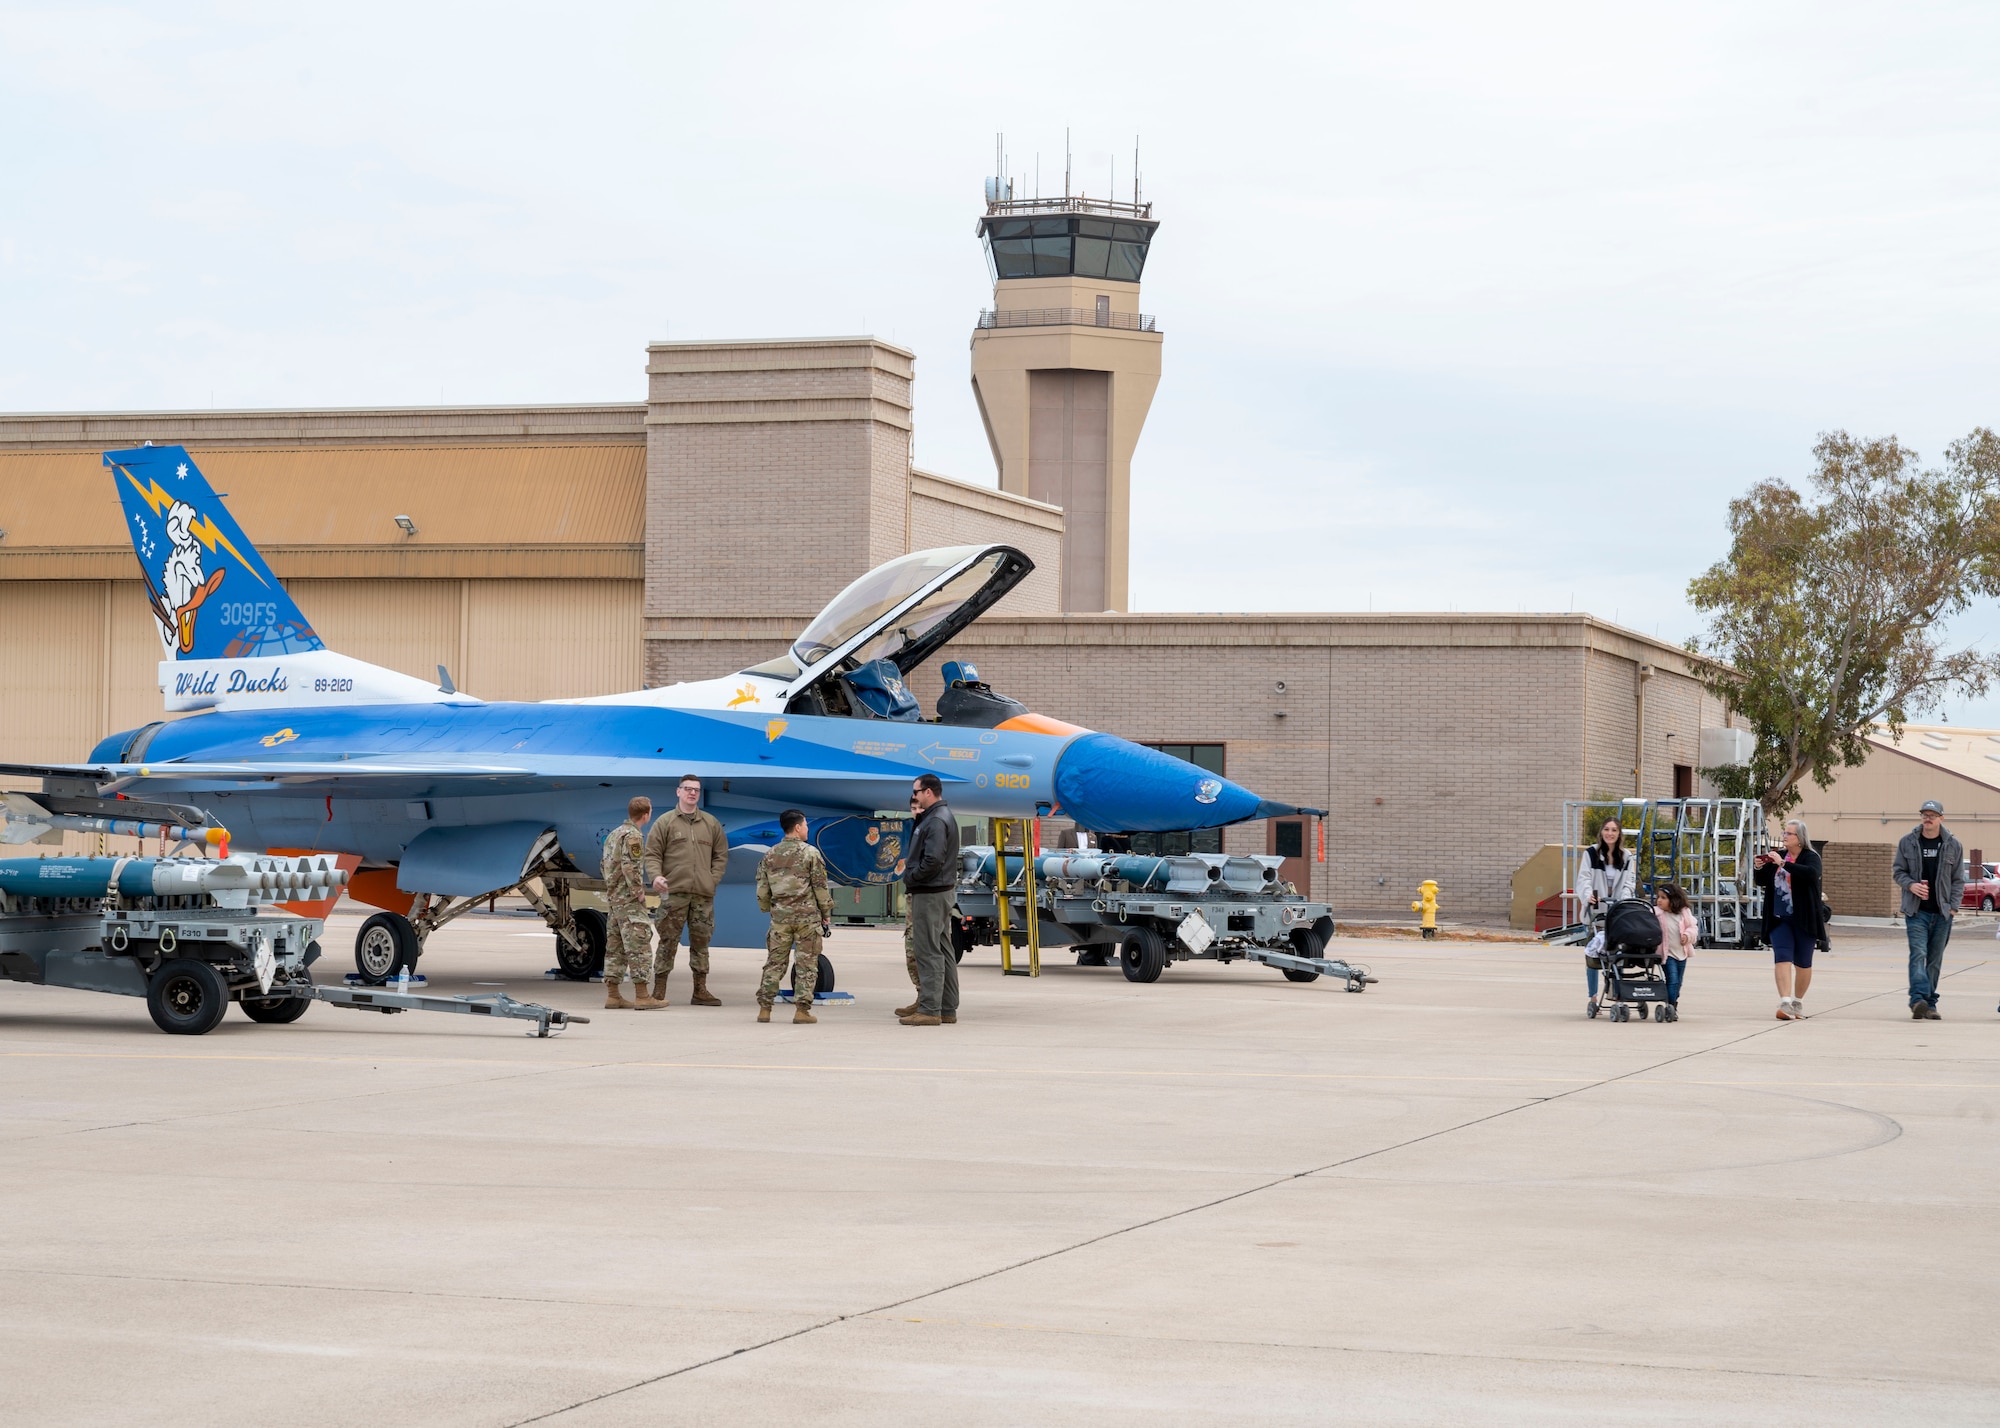 An F-16 Fighting Falcon assigned to the 309th Fighter Squadron sits on display at the 56th Operations and Maintenance Group Open House, Dec. 2, 2022, at Luke Air Force Base, Arizona.